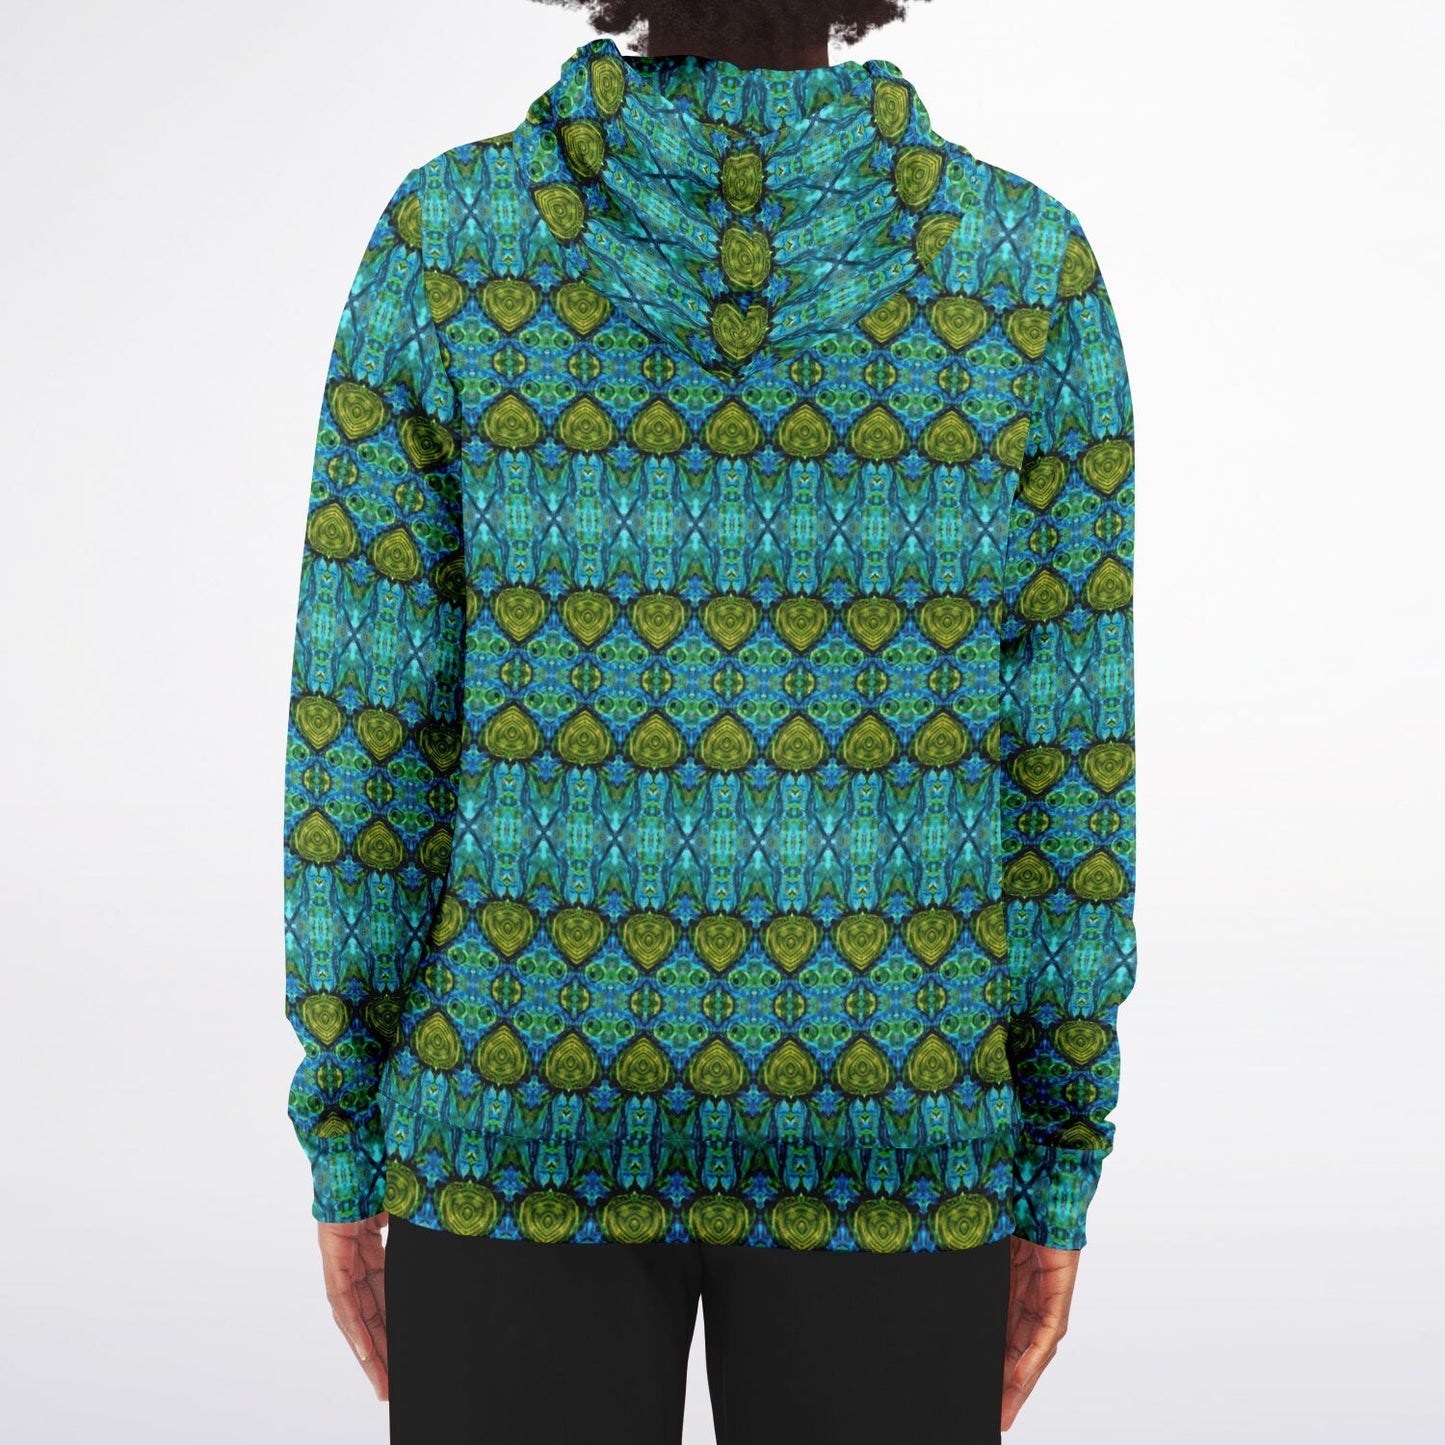 Full zip hoodie in blue and green with heart pattern print